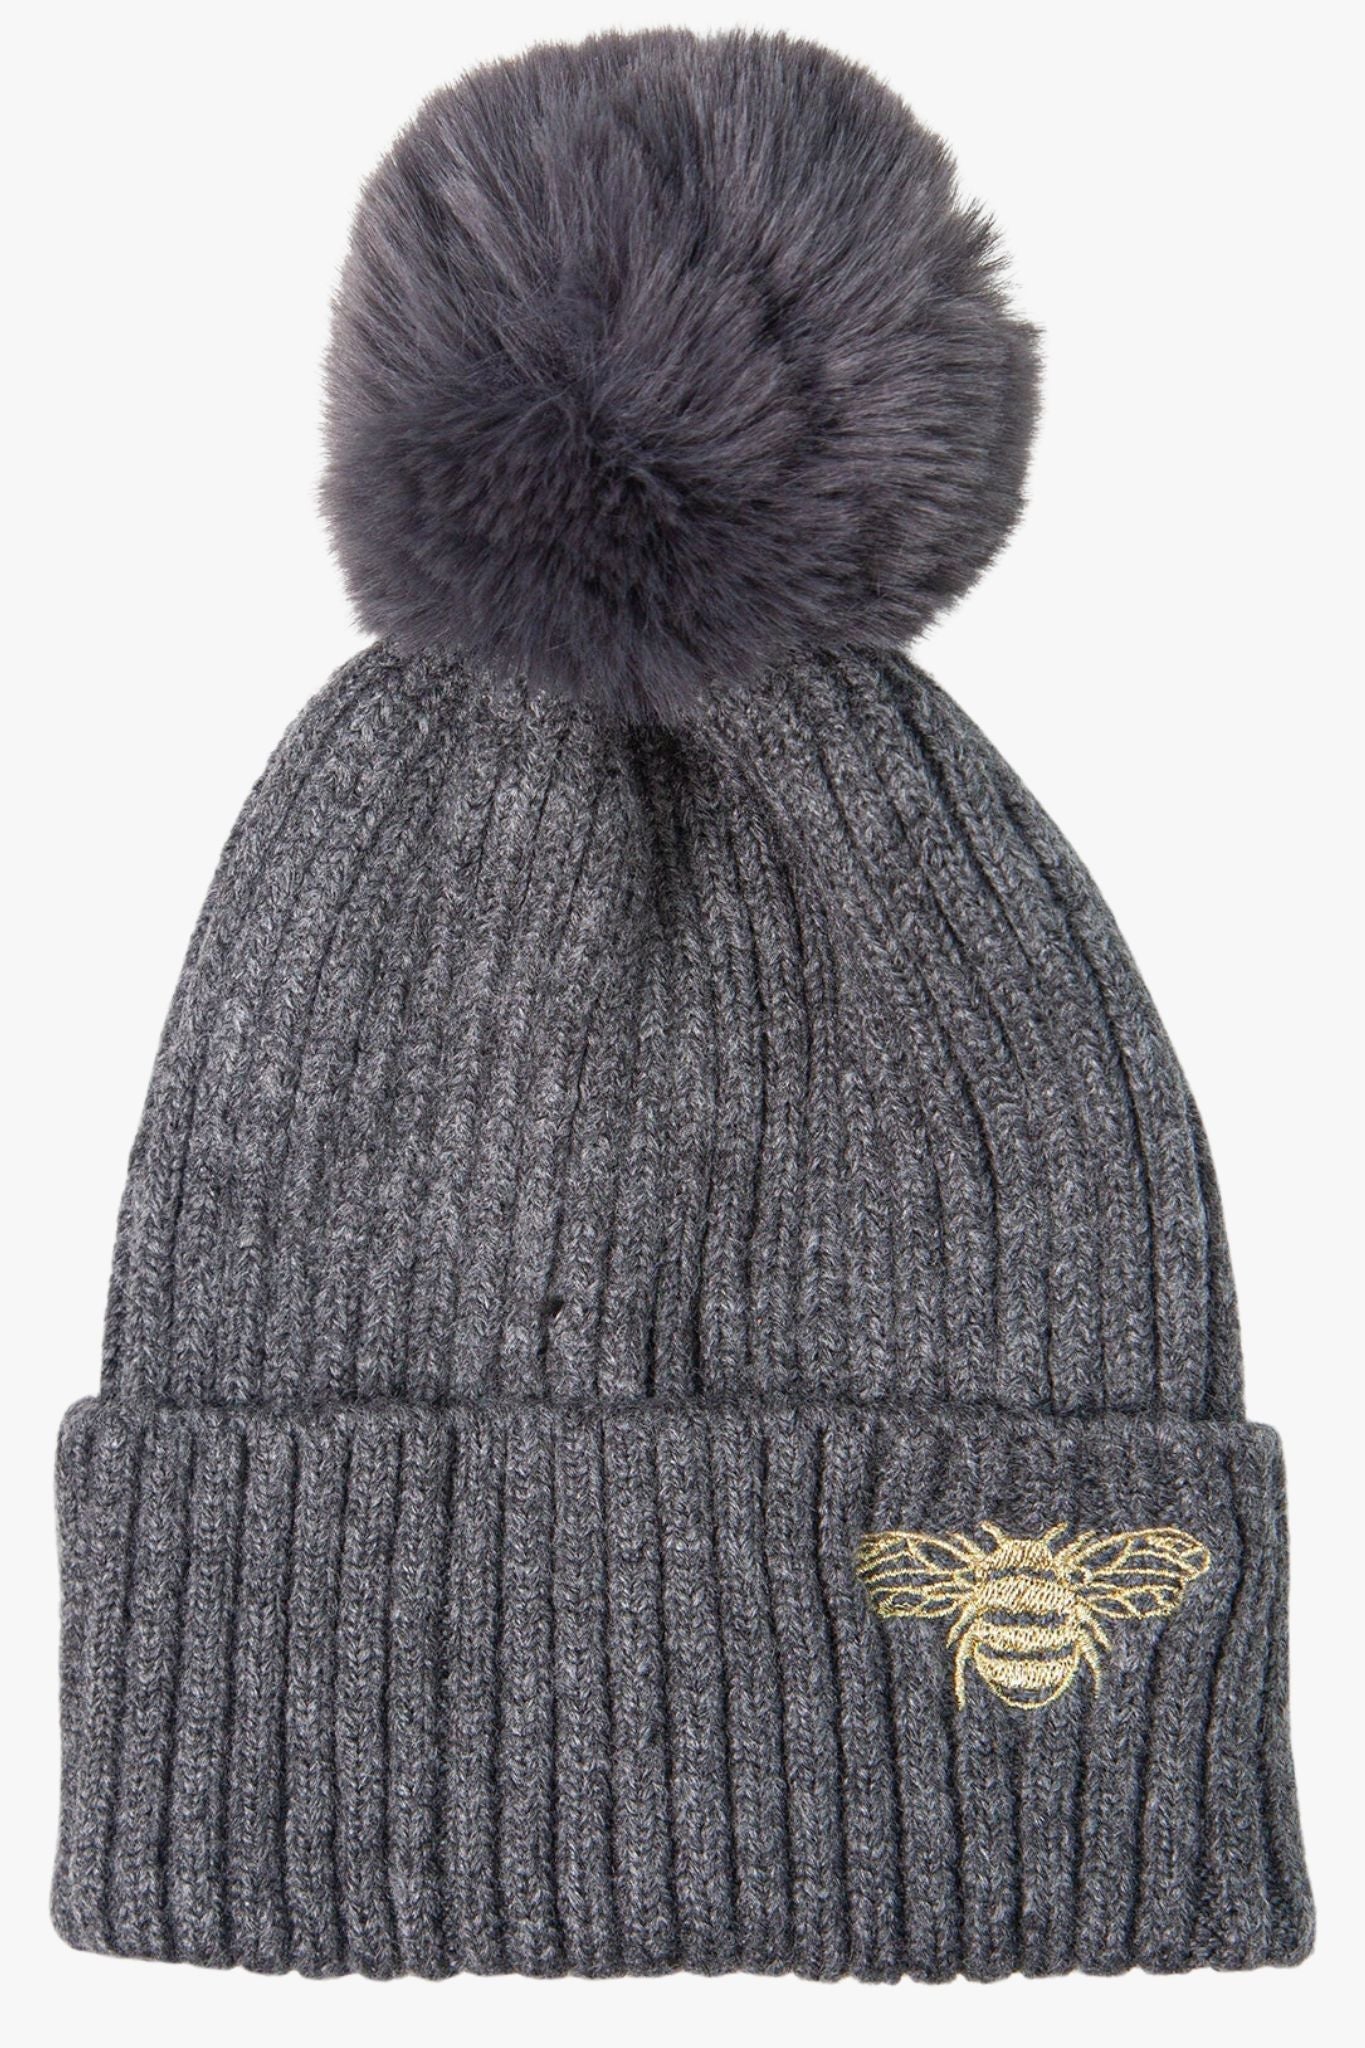 dark grey winter pom pom hat with a gold embroidered bee on the rim